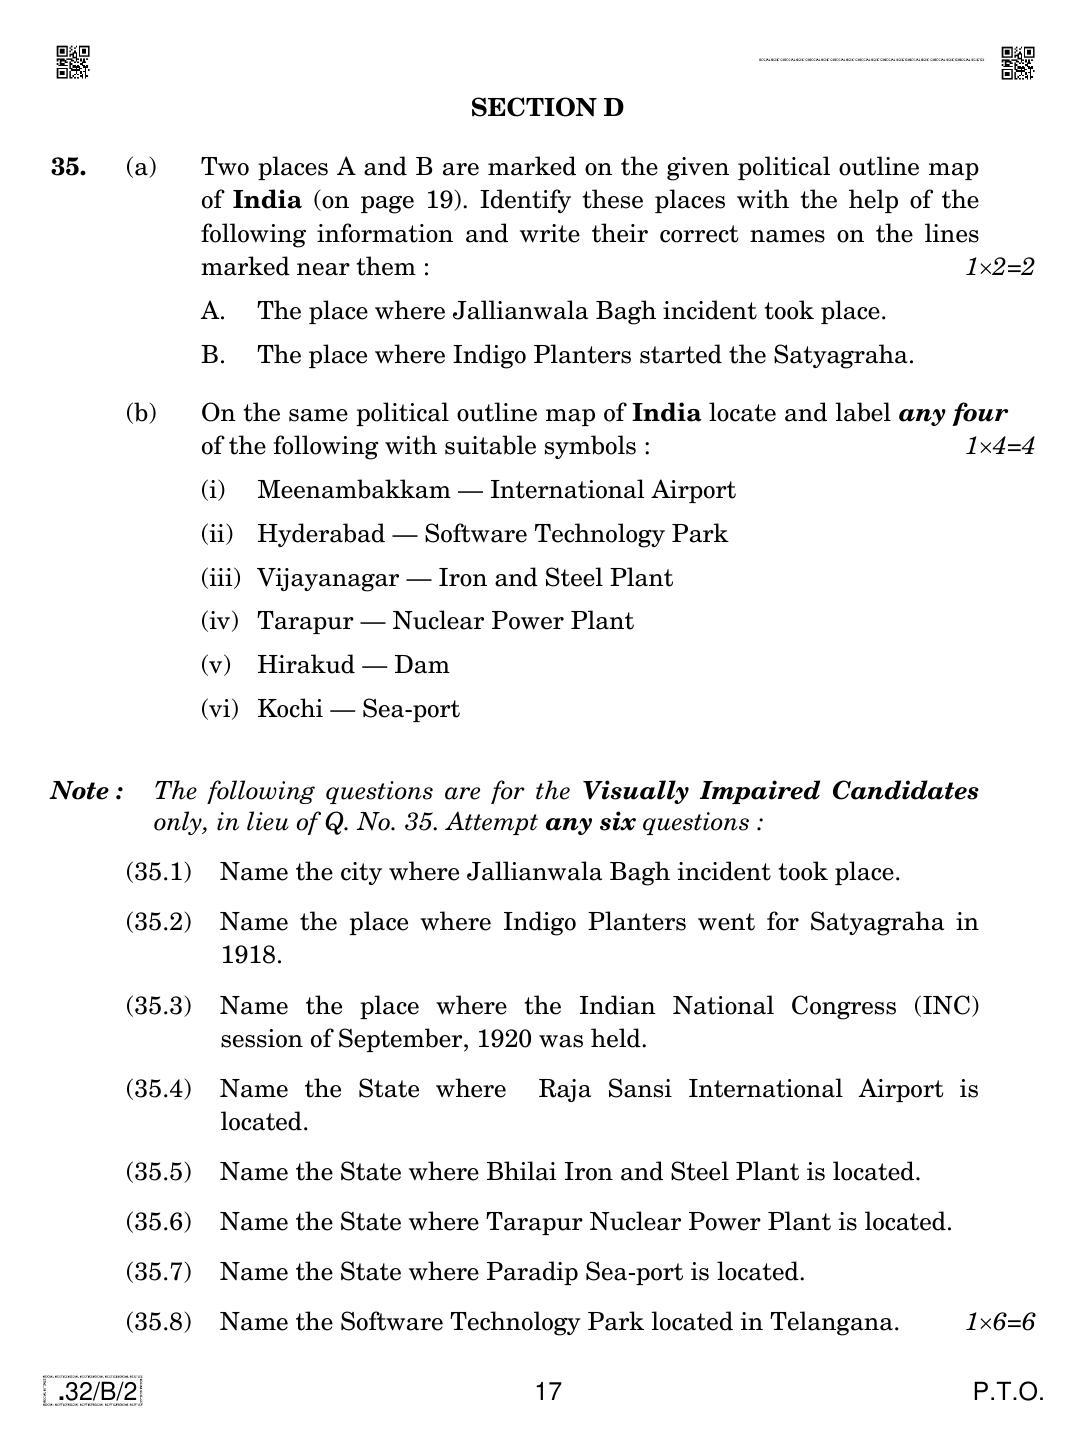 CBSE Class 10 32-C-2 Social Science 2020 Compartment Question Paper - Page 17